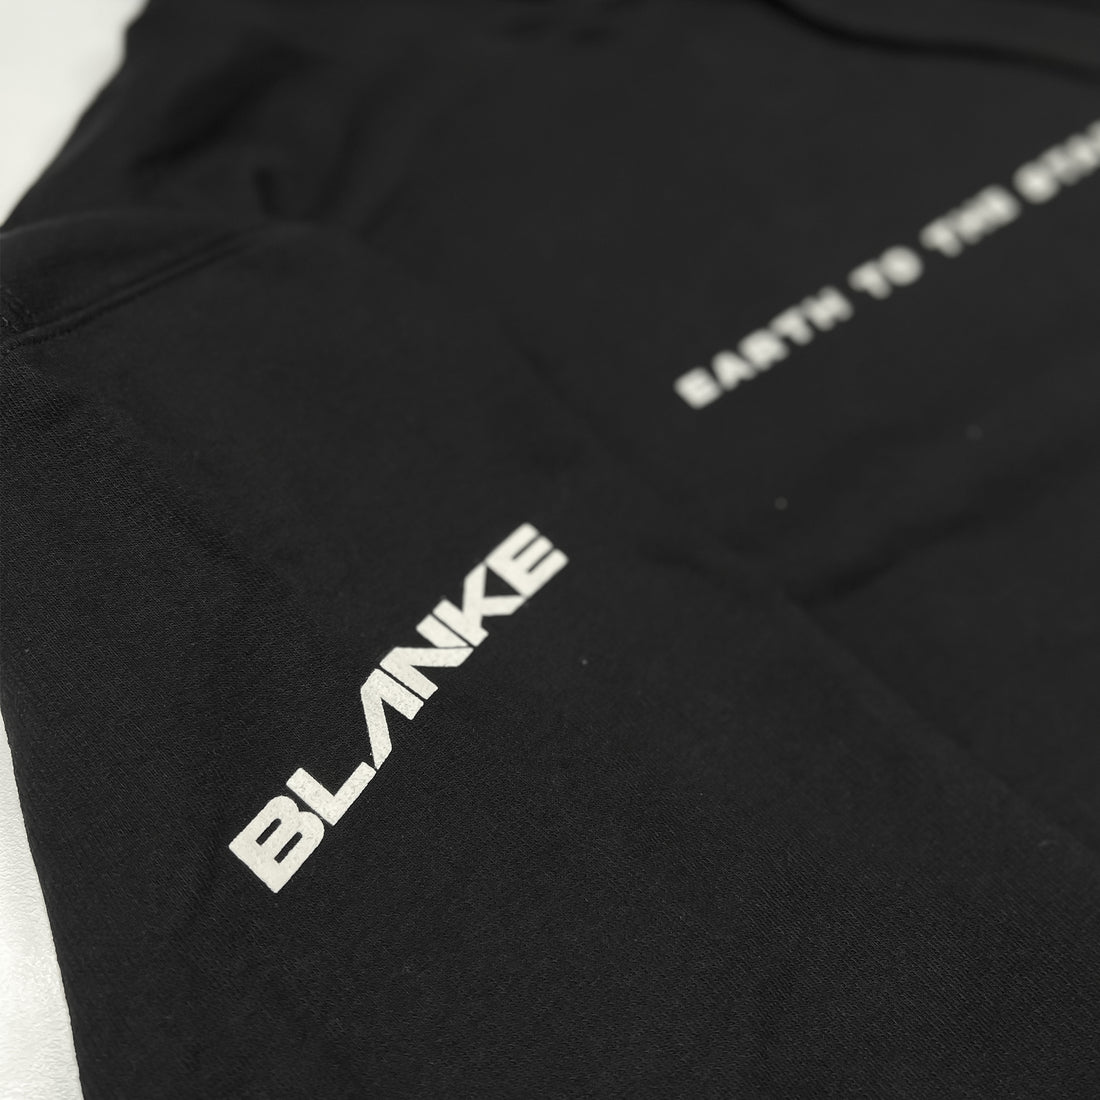 Blanke - From Earth To The Stars - Tour Hoodie